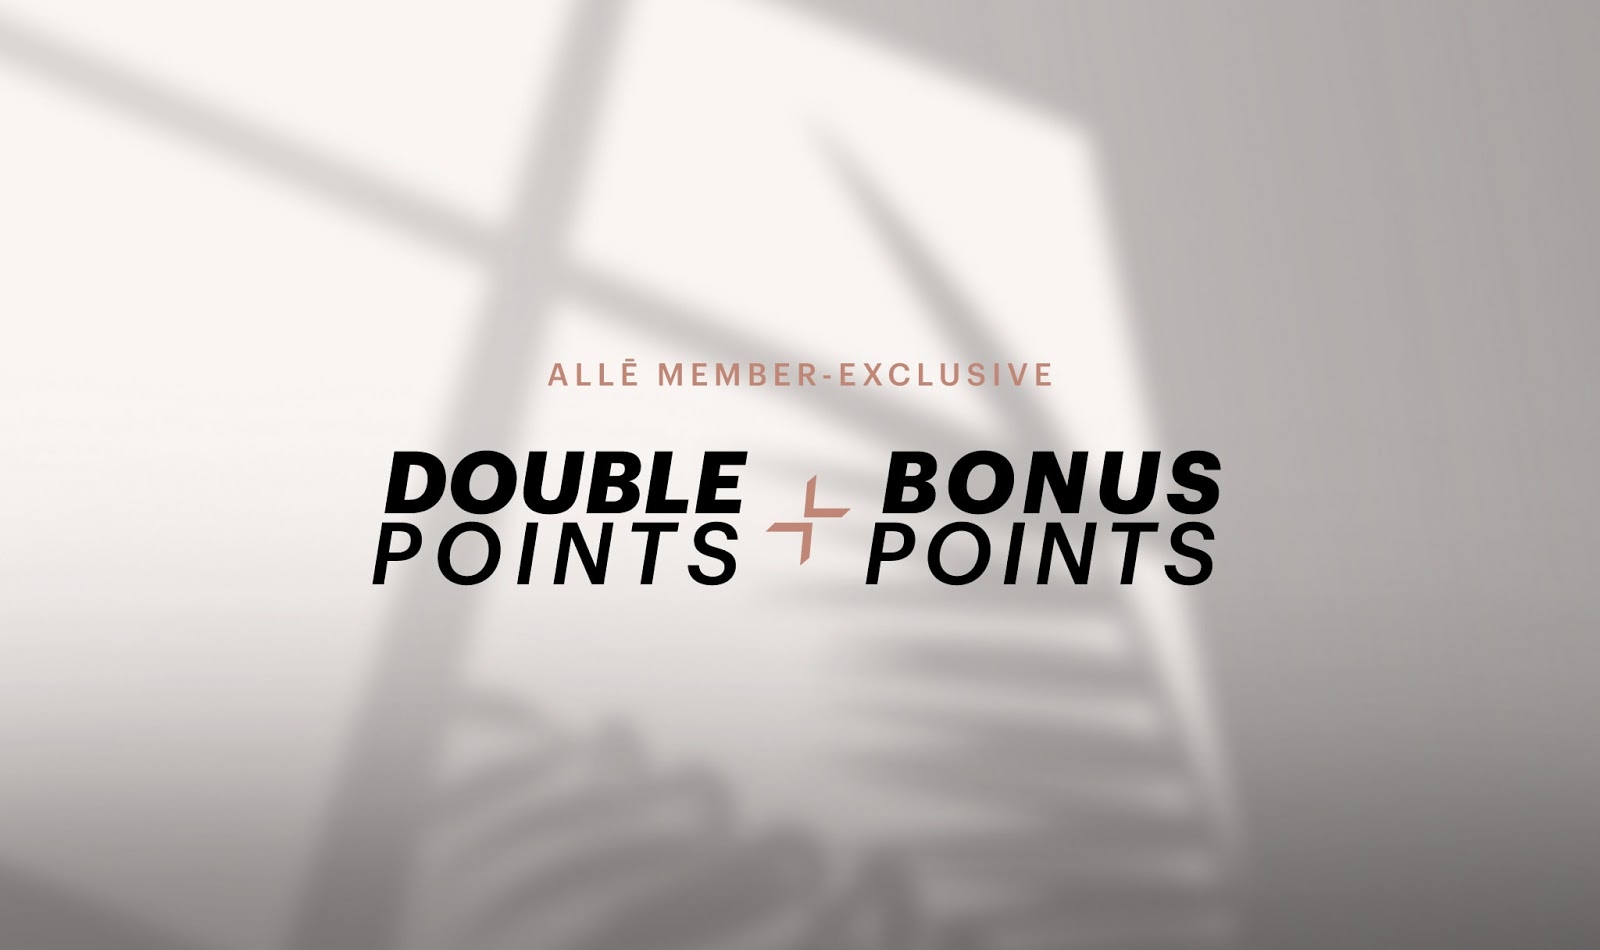 Alle member exclusive points deal August 2021